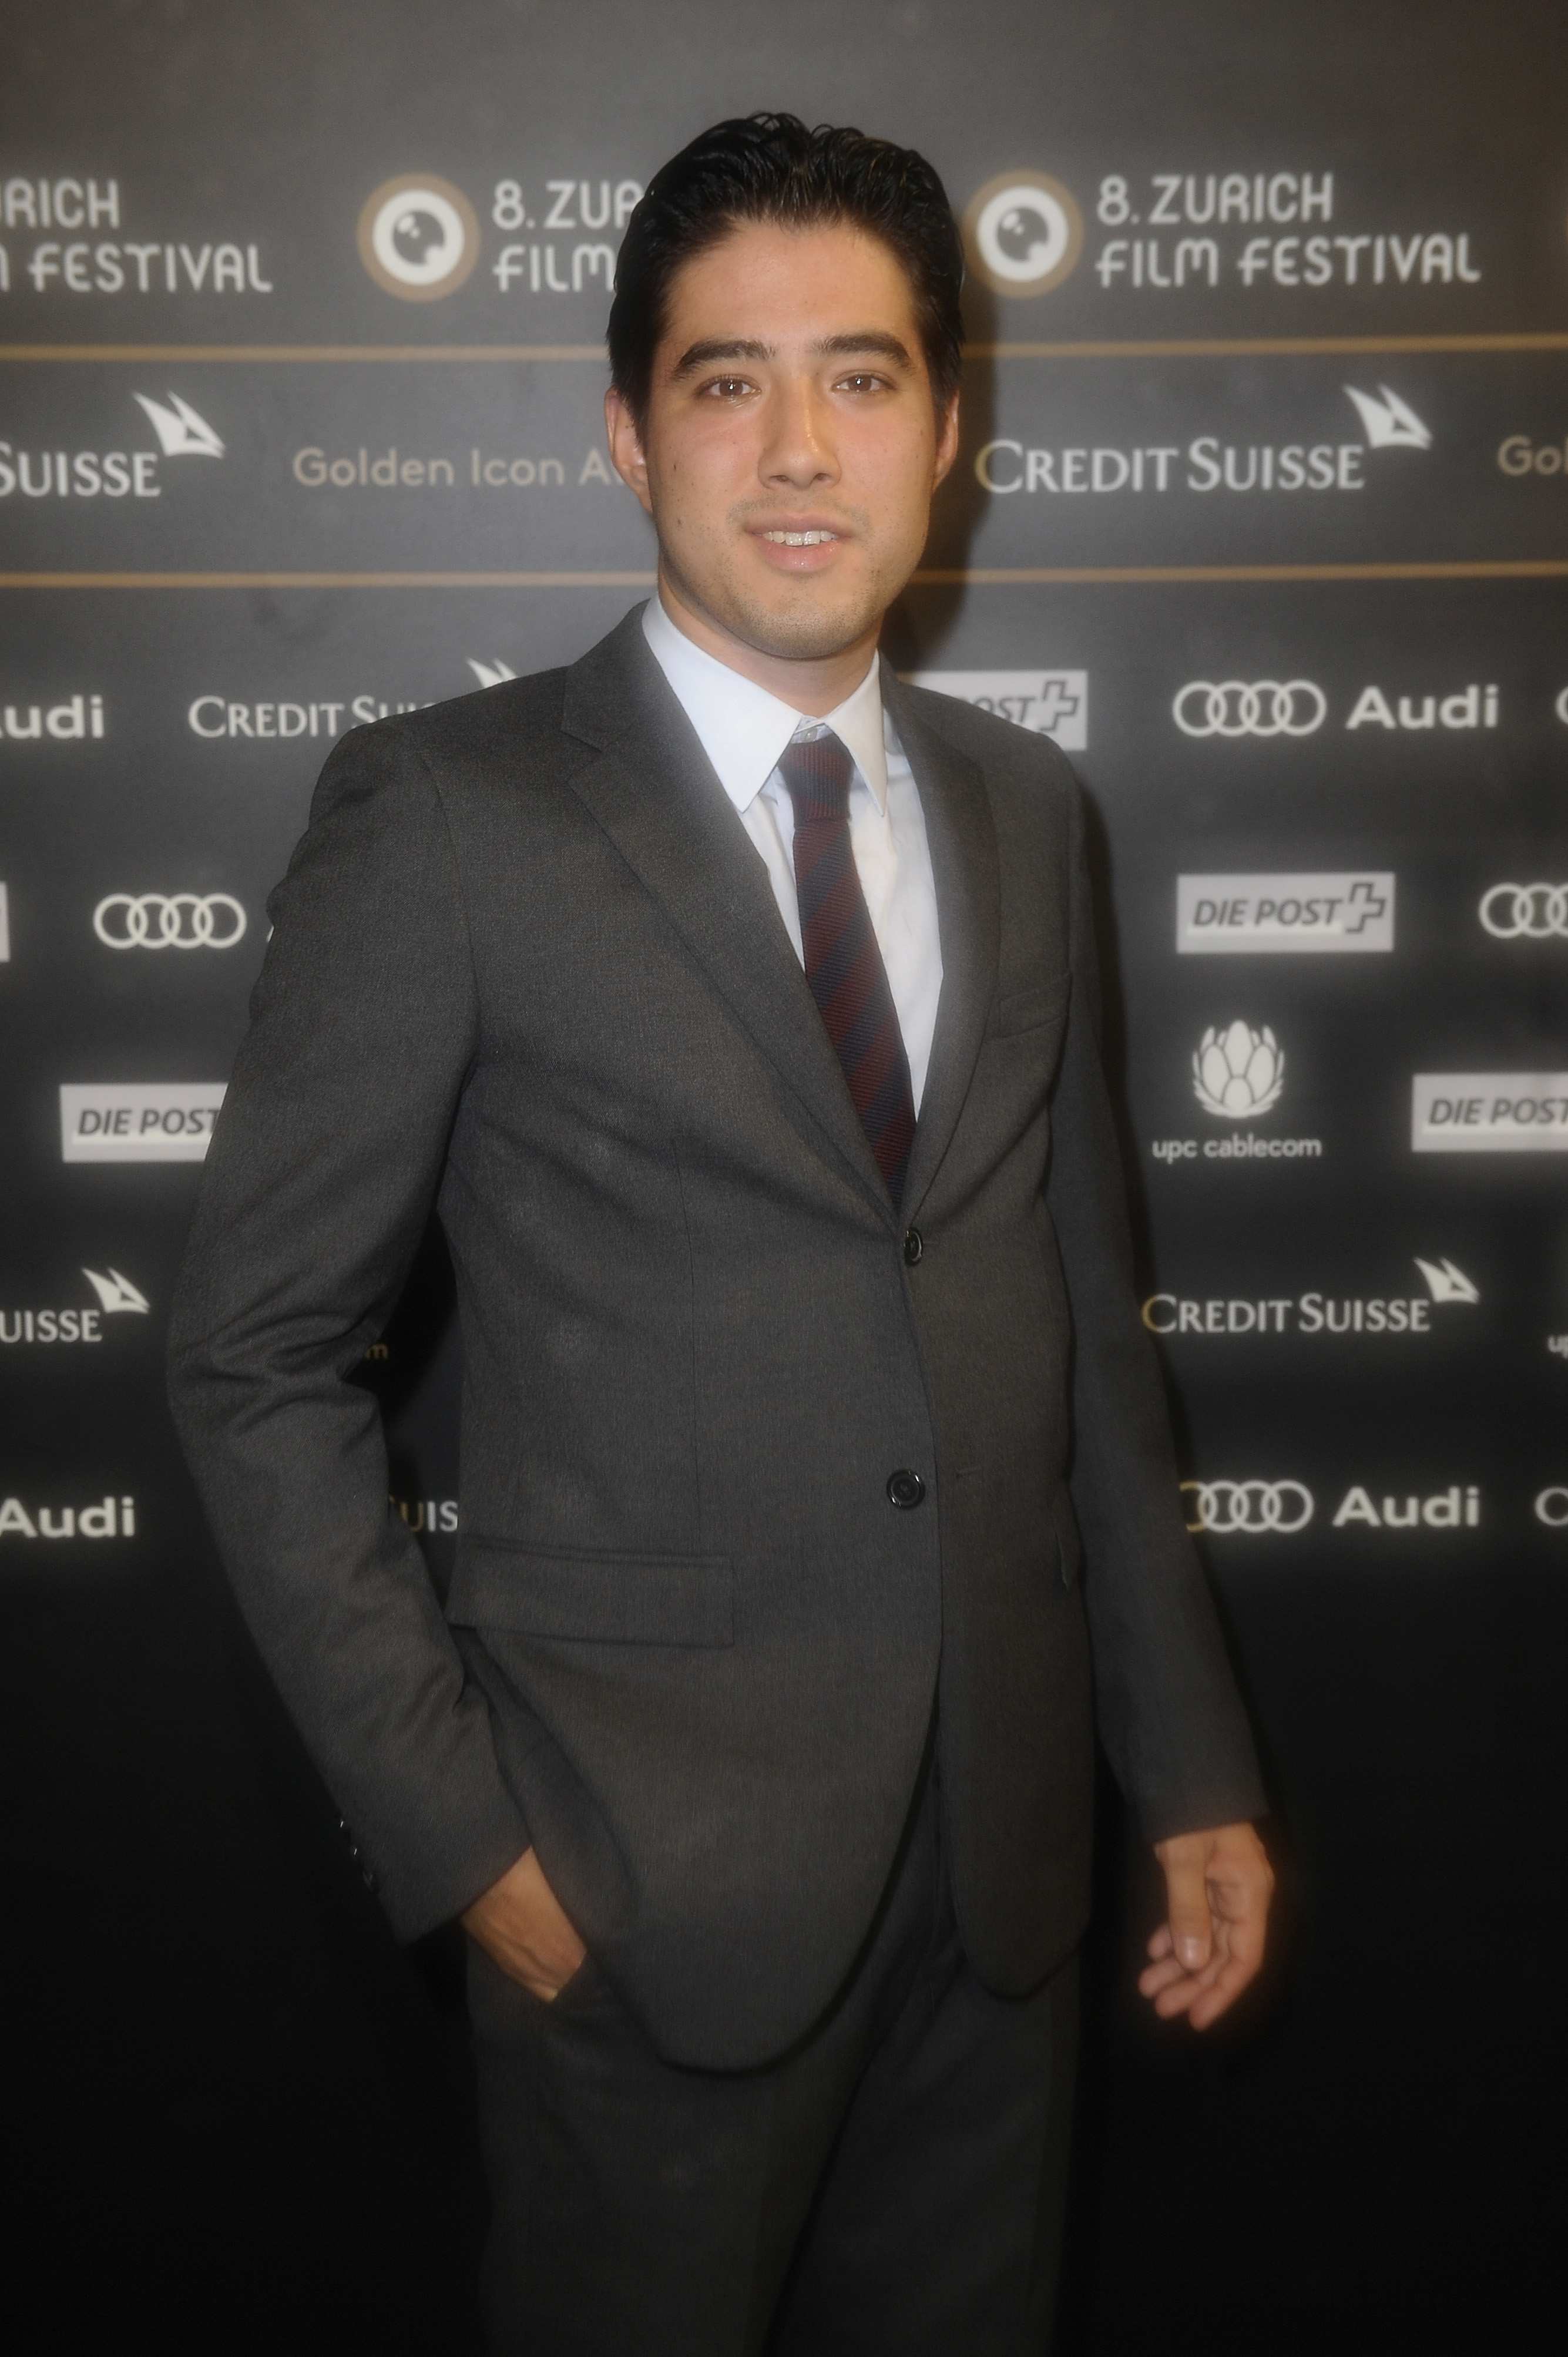 ZURICH, SWITZERLAND - SEPTEMBER 23: Justin Nappi attends 'Arbitrage' premiere as part of the Zurich Film Festival 2012 on September 23, 2012 in Zurich, Switzerland. (Photo by Luca Teuchmann/Getty Images)